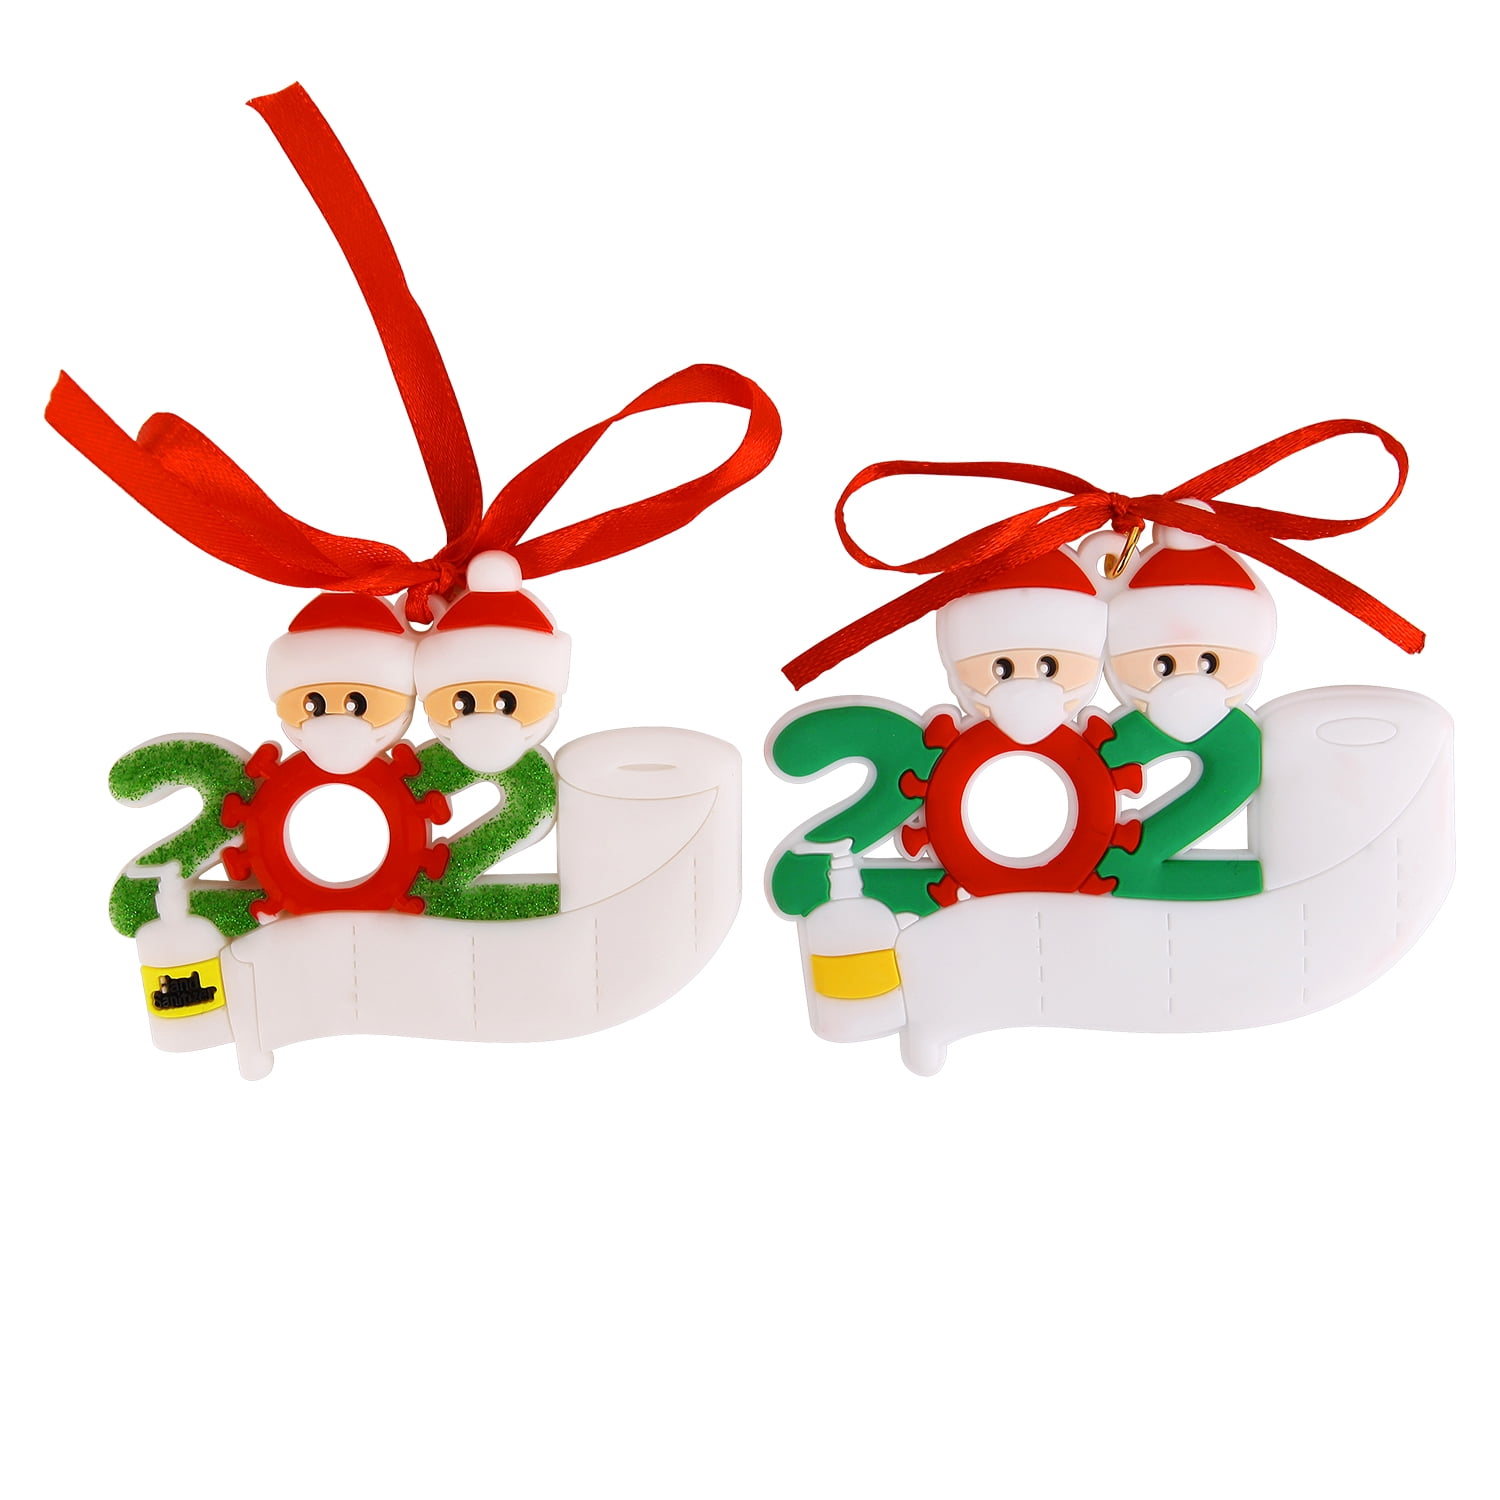 Details about   2020 Xmas Christmas Hanging Ornaments Family Personalized Ornament US 